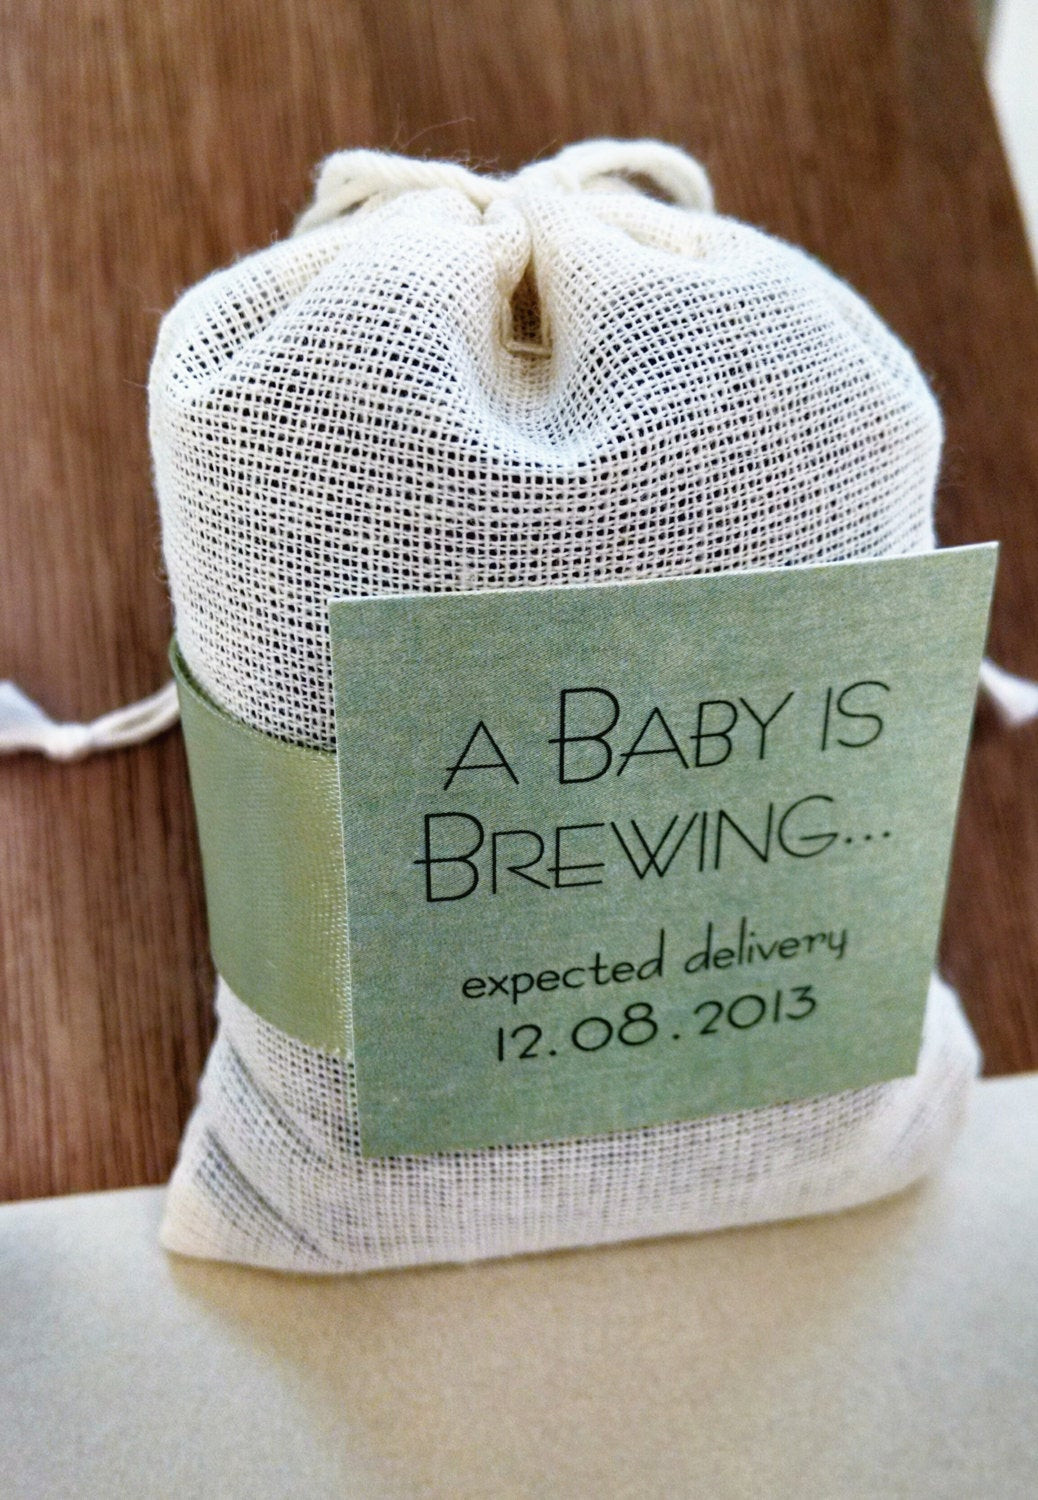 Baby Gift Bag Ideas
 Assembled A Baby Uni is Brewing Tea Bag party favor by